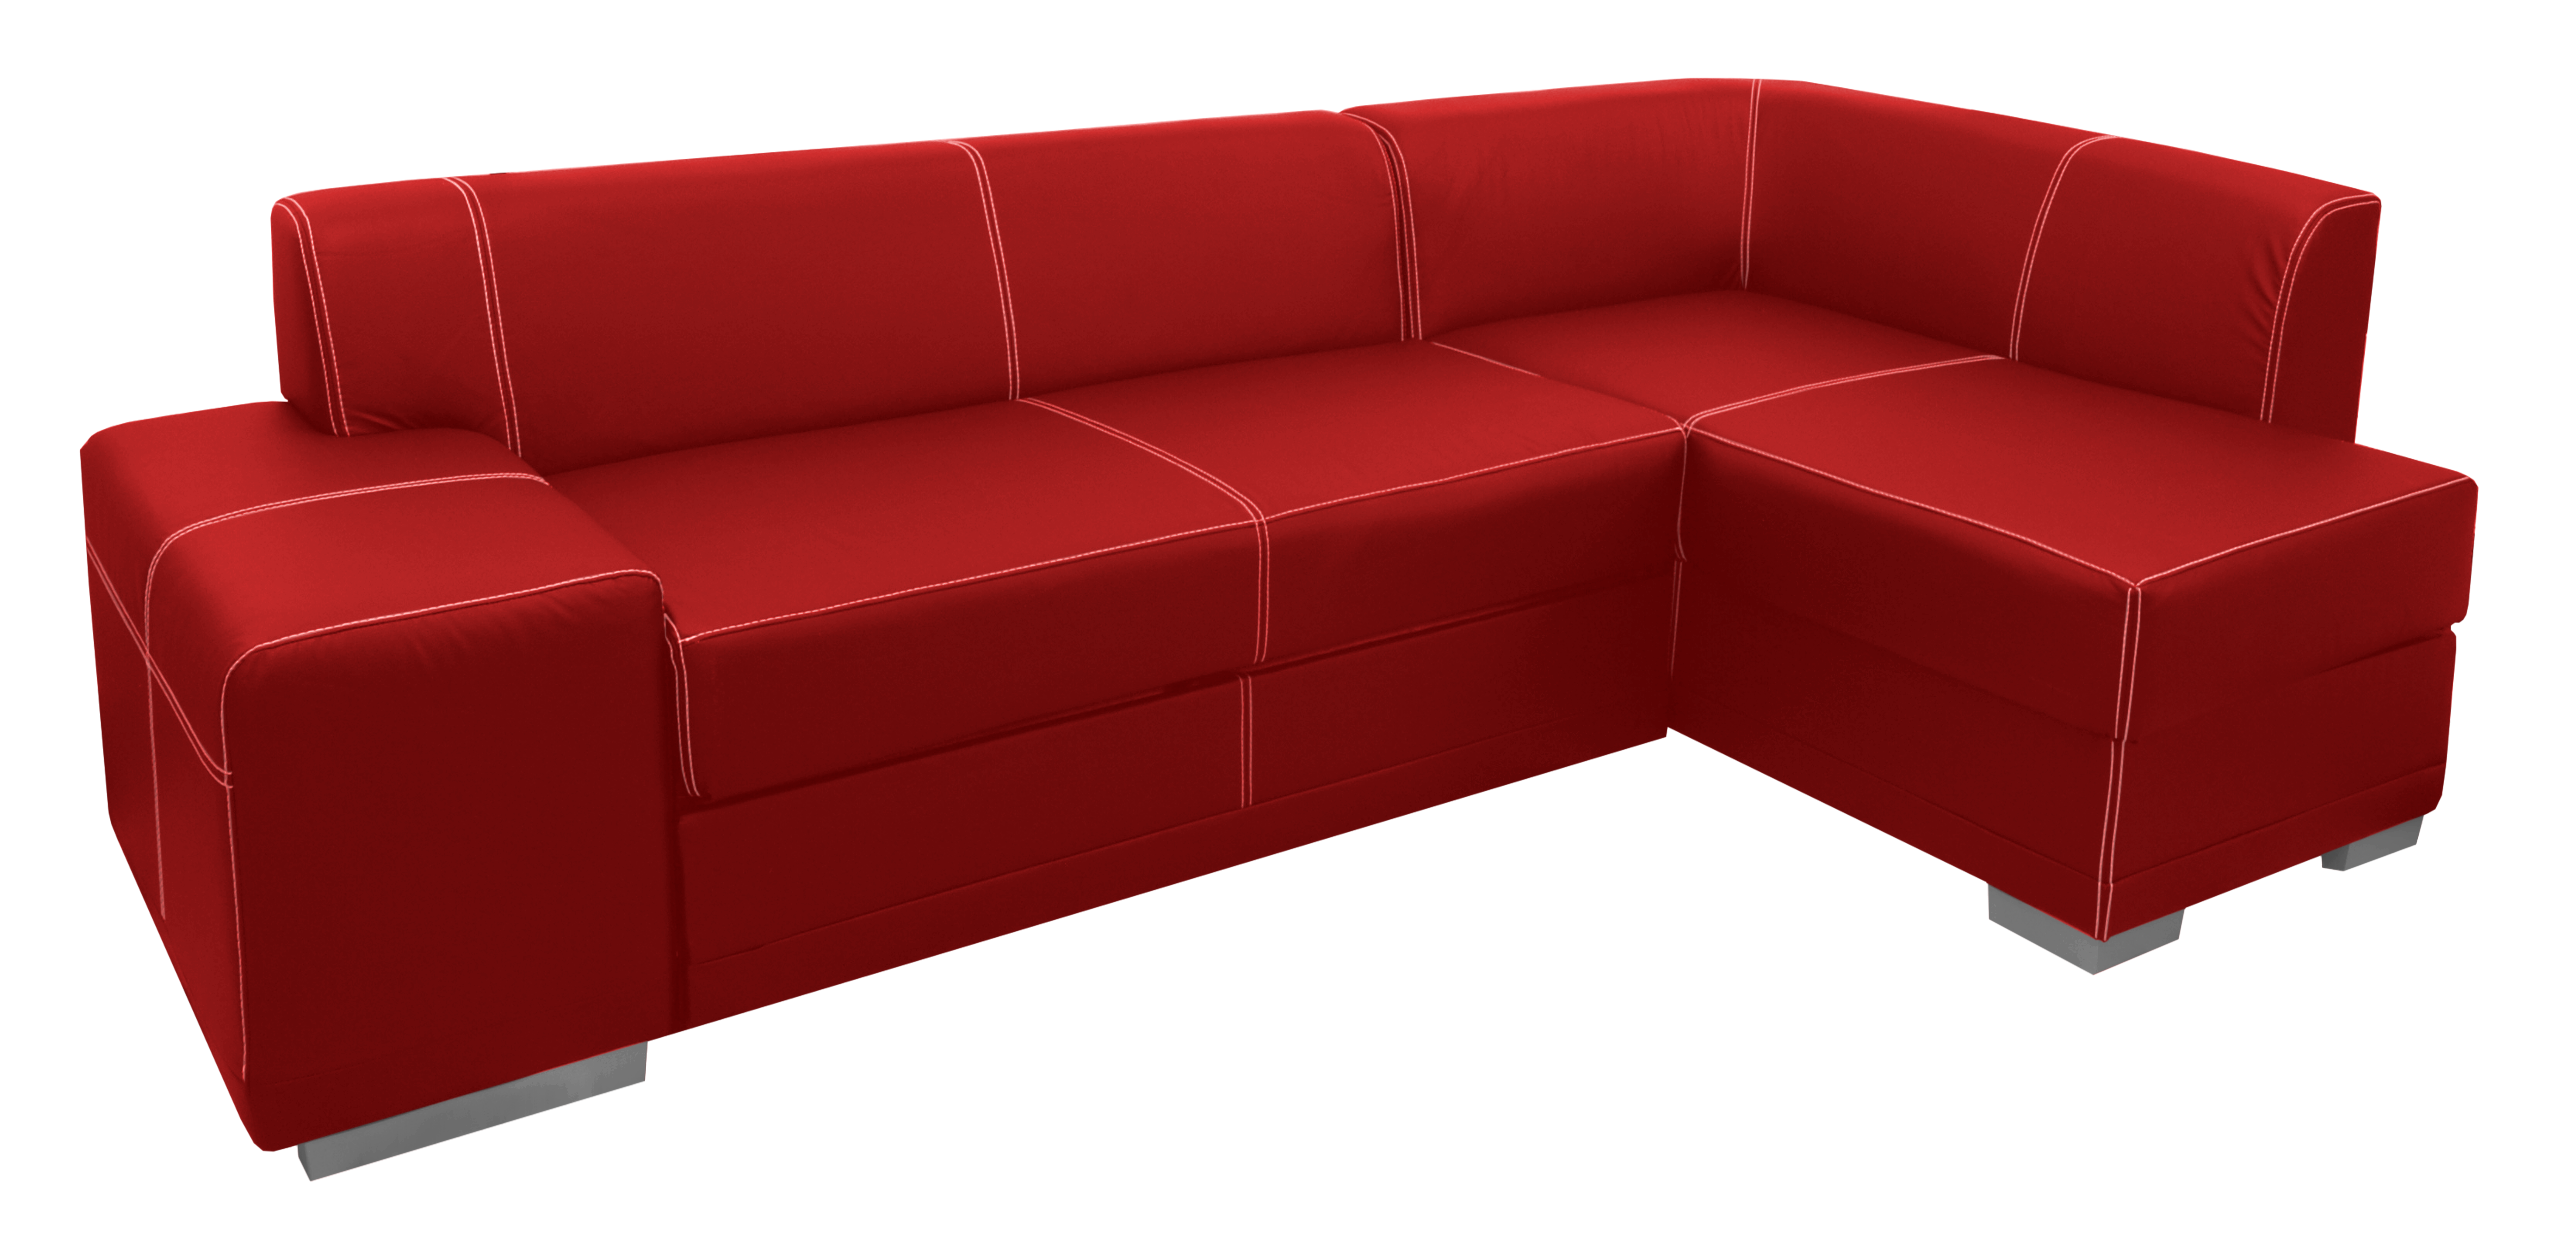 Sofa Free Download Png - Couch, Transparent background PNG HD thumbnail